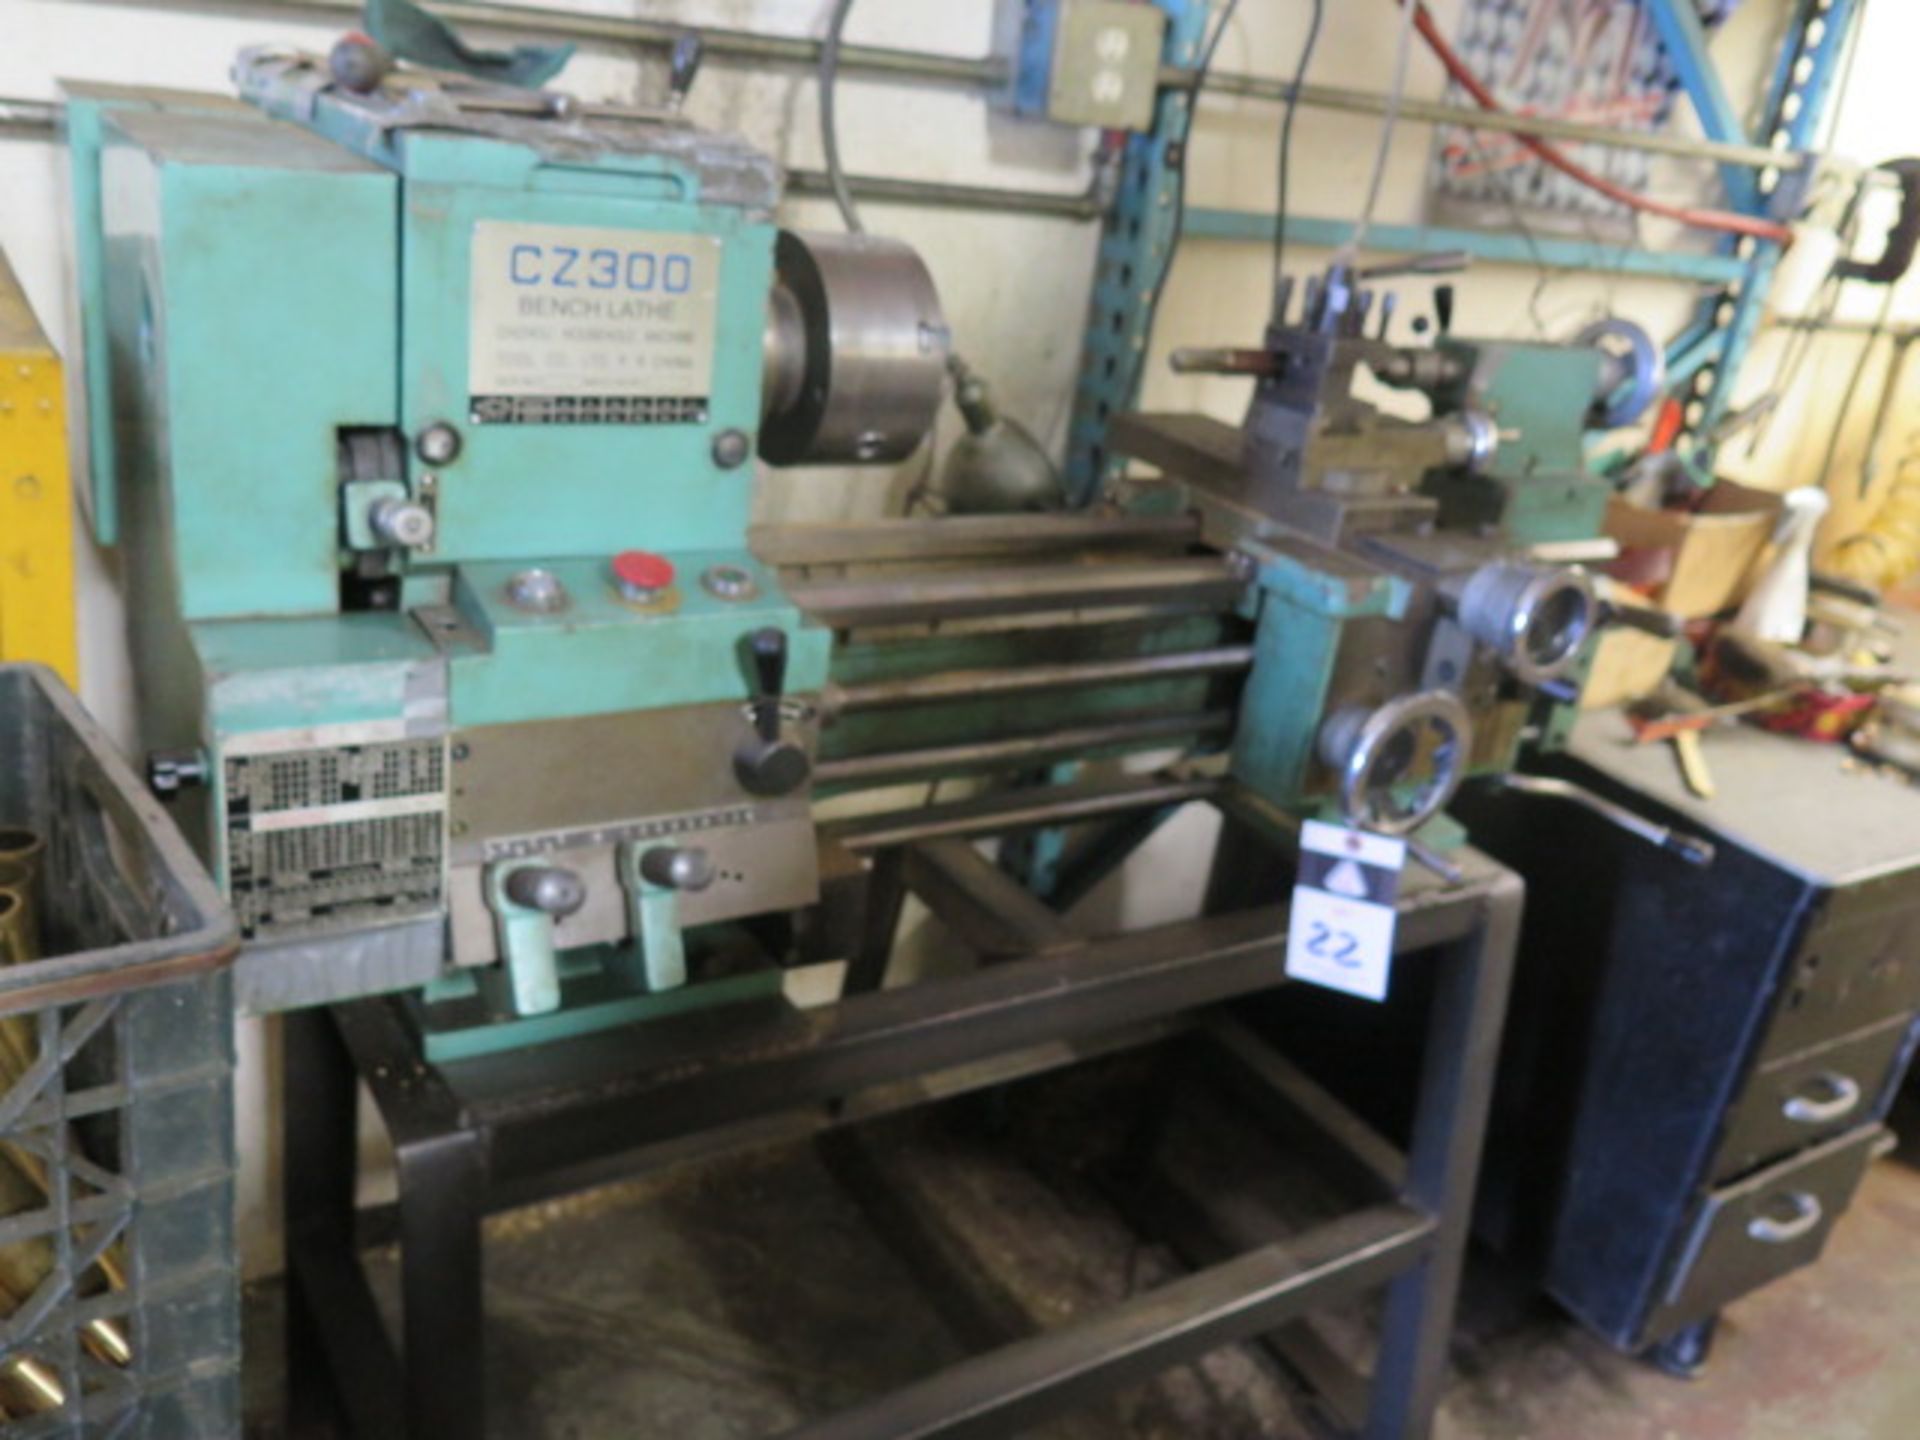 Chizhou mdl. CZ300 11 ½” x 24” Lathe s/n 0101 w/ 50-1200 RPM, Inch/mm Thread, Tailstock, SOLD AS IS